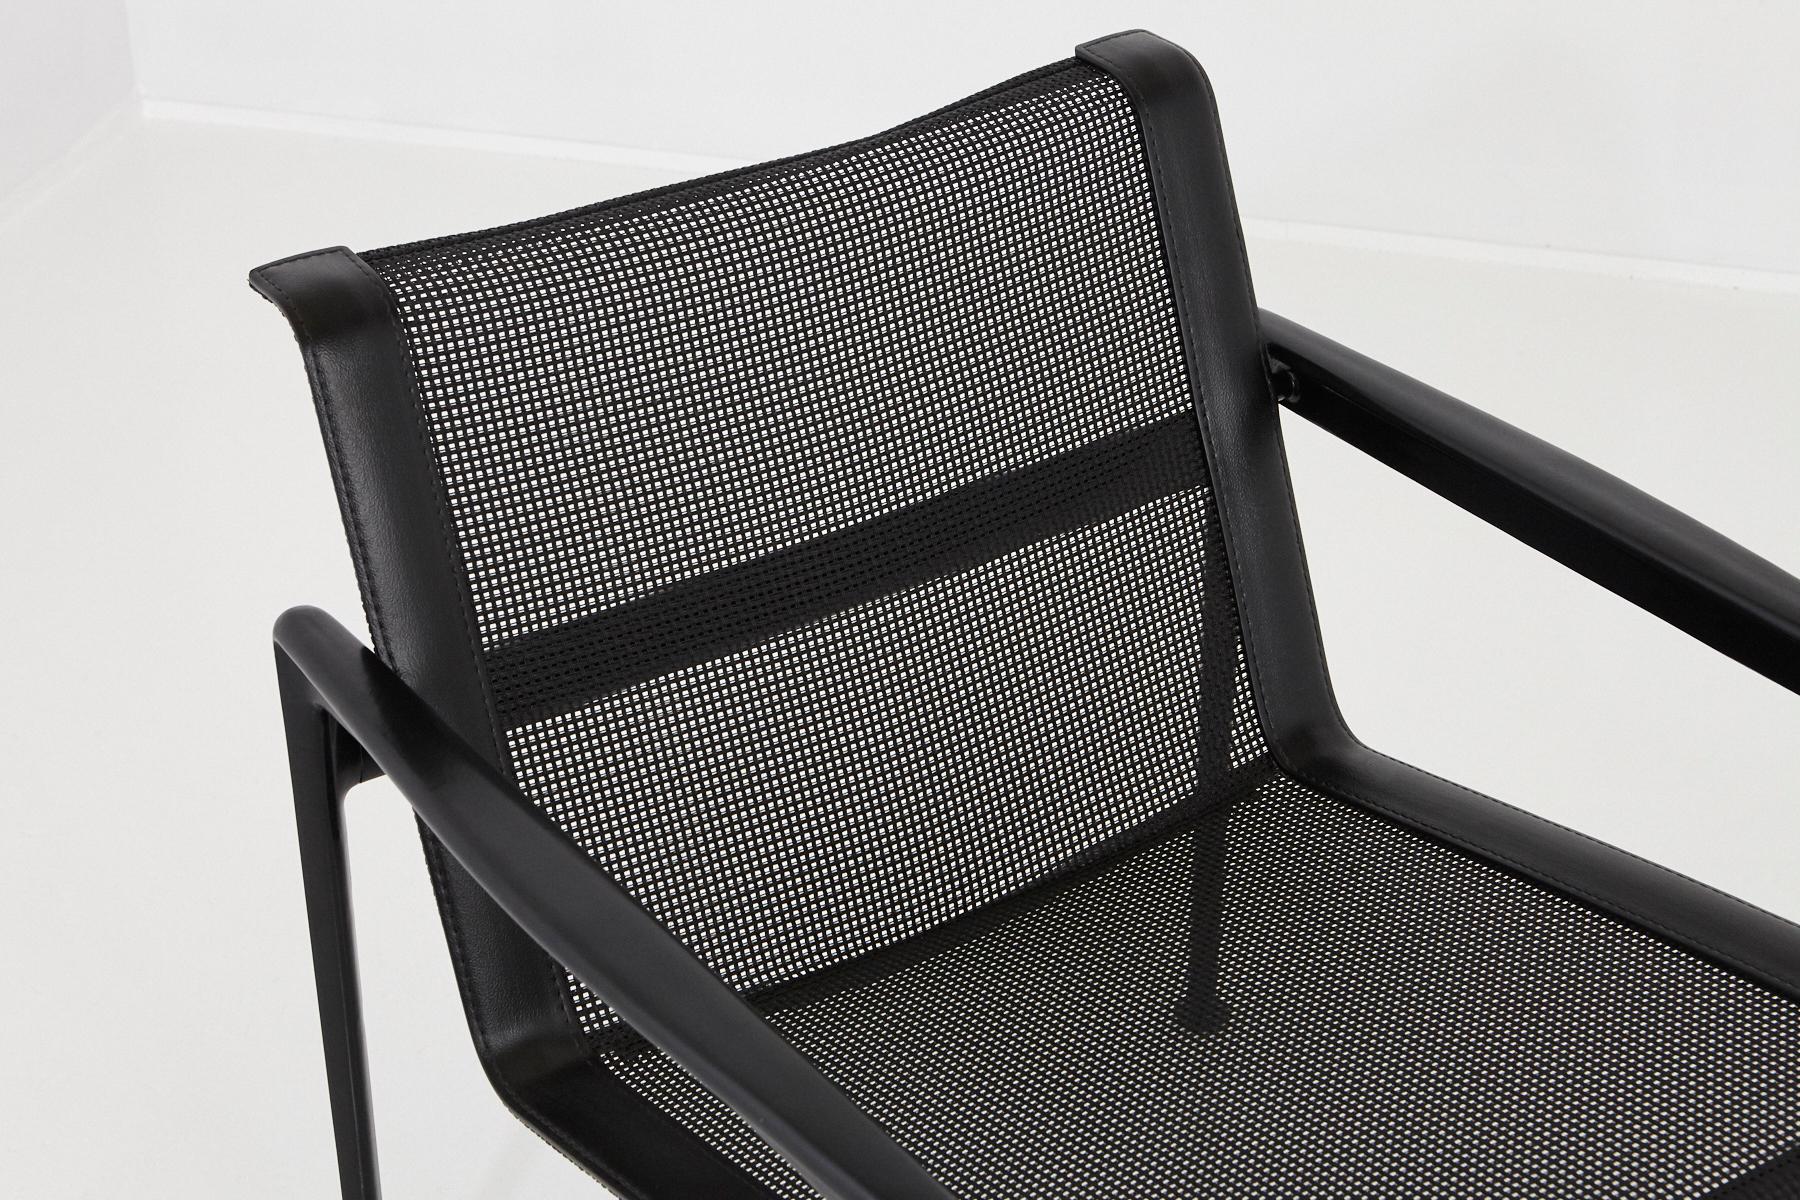 Contemporary Richard Schultz All Black Garden Lounge Chair from the '1966 Collection' For Sale